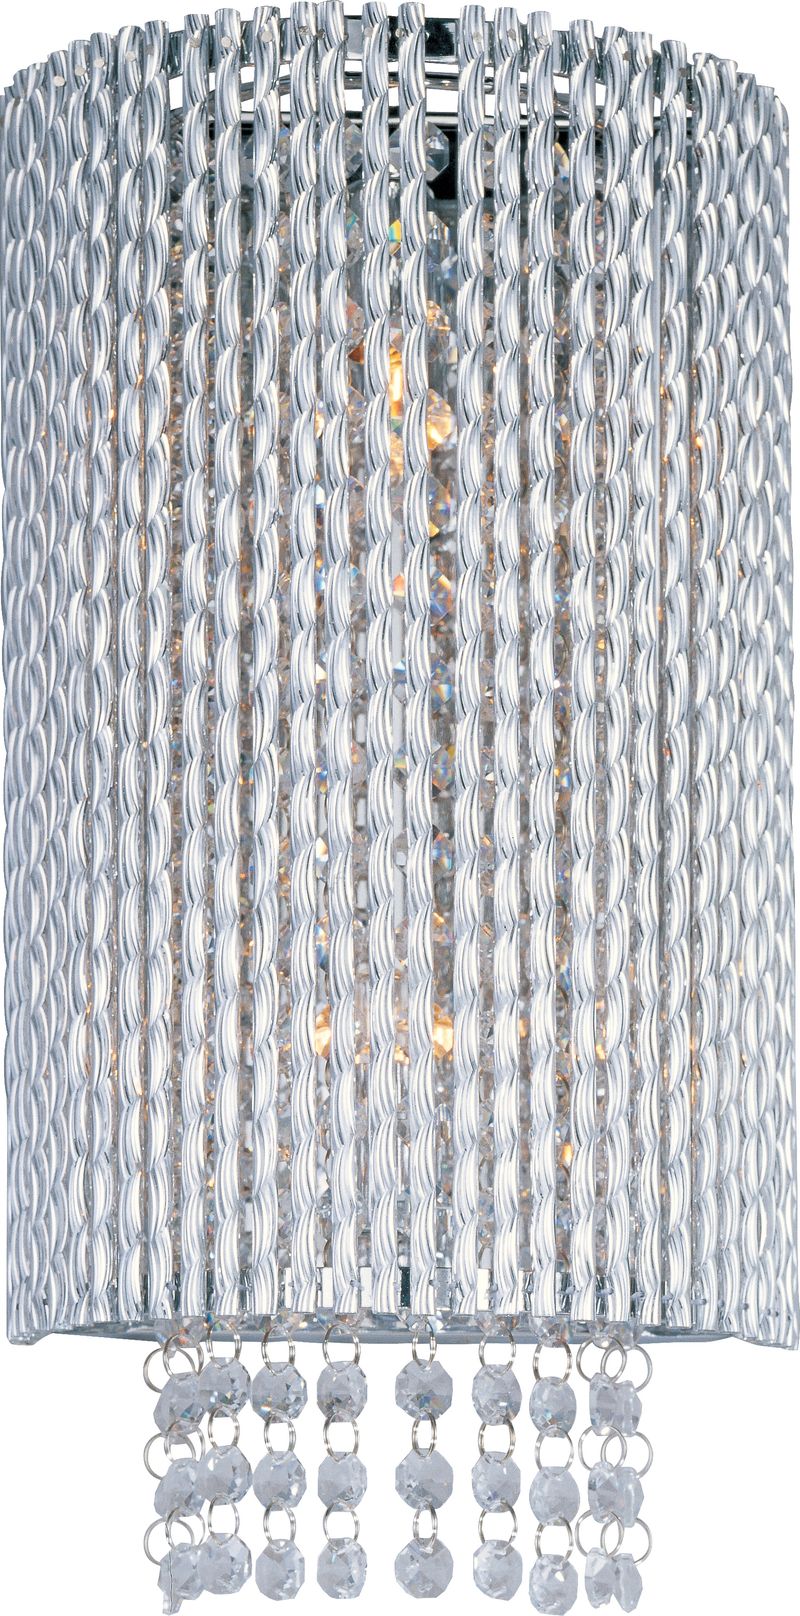 Spiral 15' 2 Light Wall Sconce in Polished Chrome